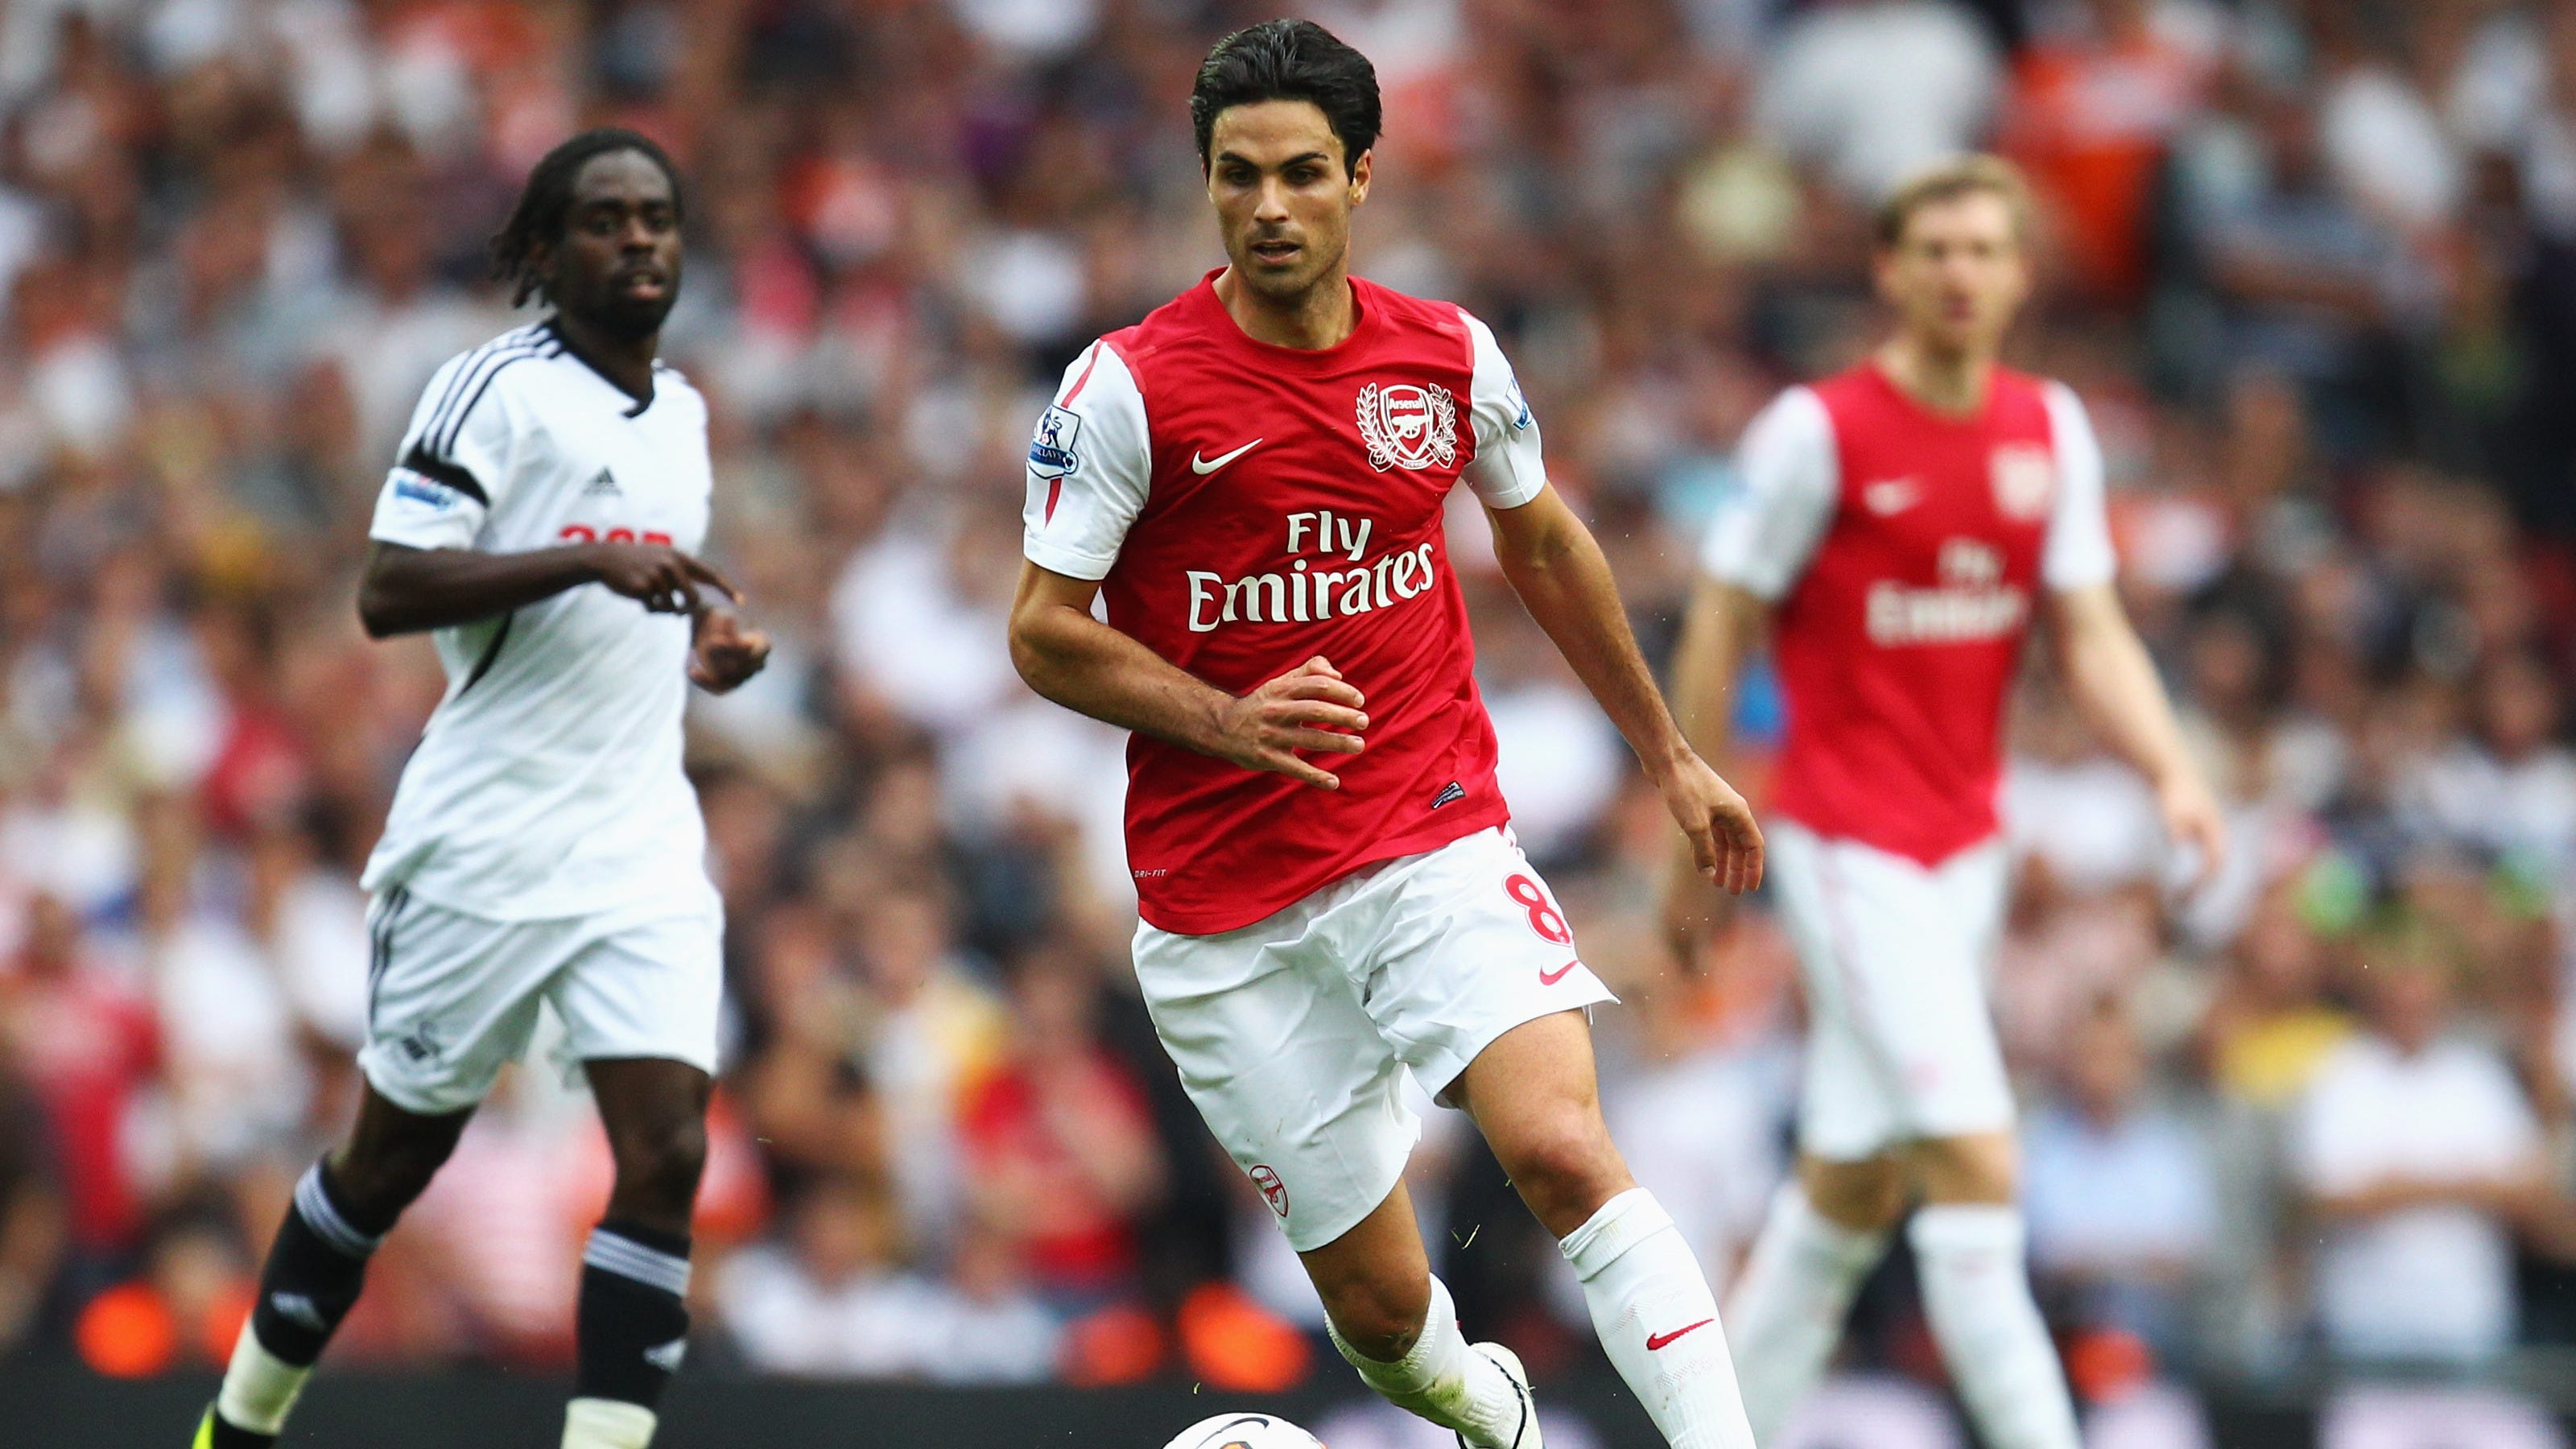 Mikel Arteta's Arsenal debut - Who were the players and where are they